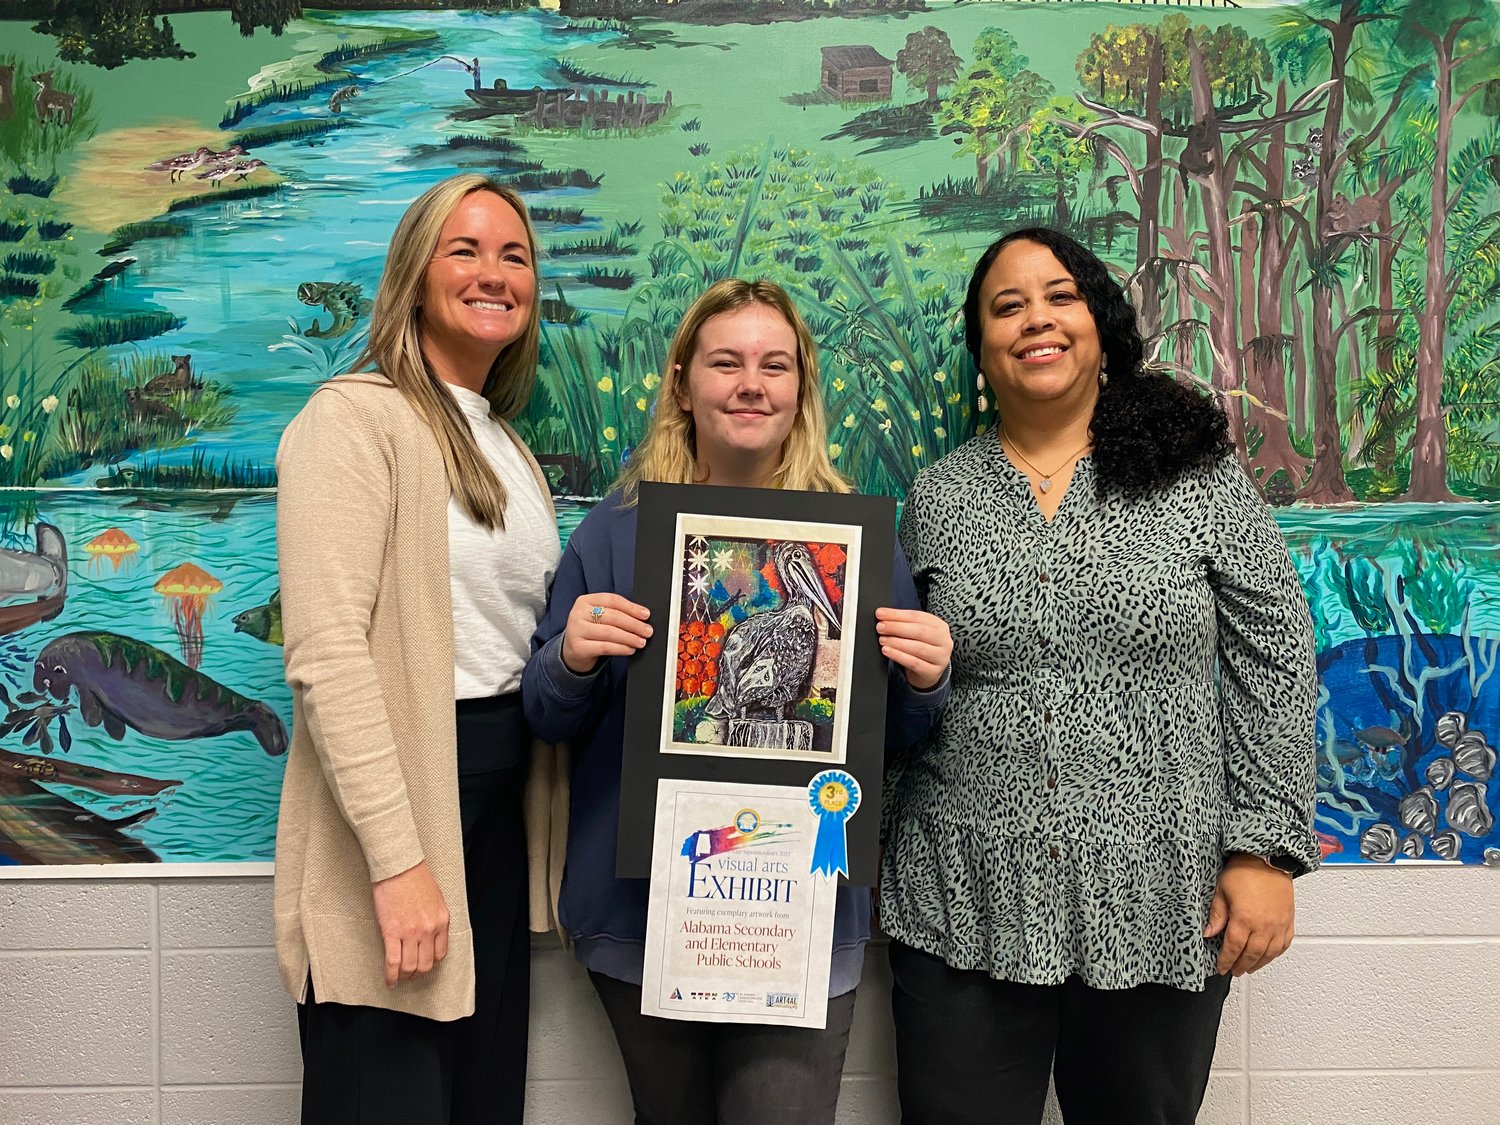 EMS Principal Katy White, Alyssa Morrow, and EMS art teacher Linda Hill. Morrow placed third in the middle school division.